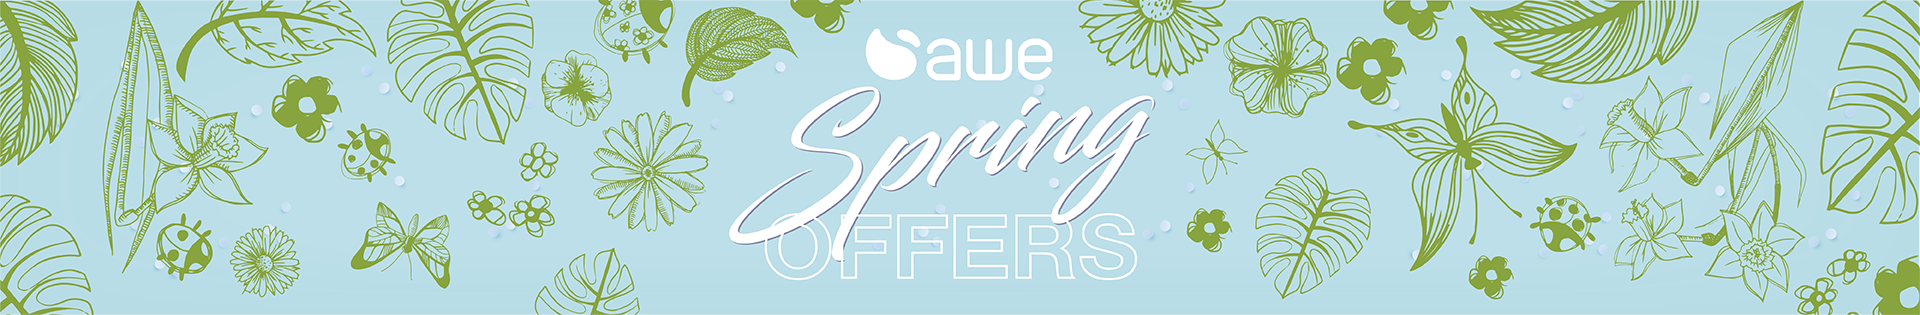 Spring Offers 